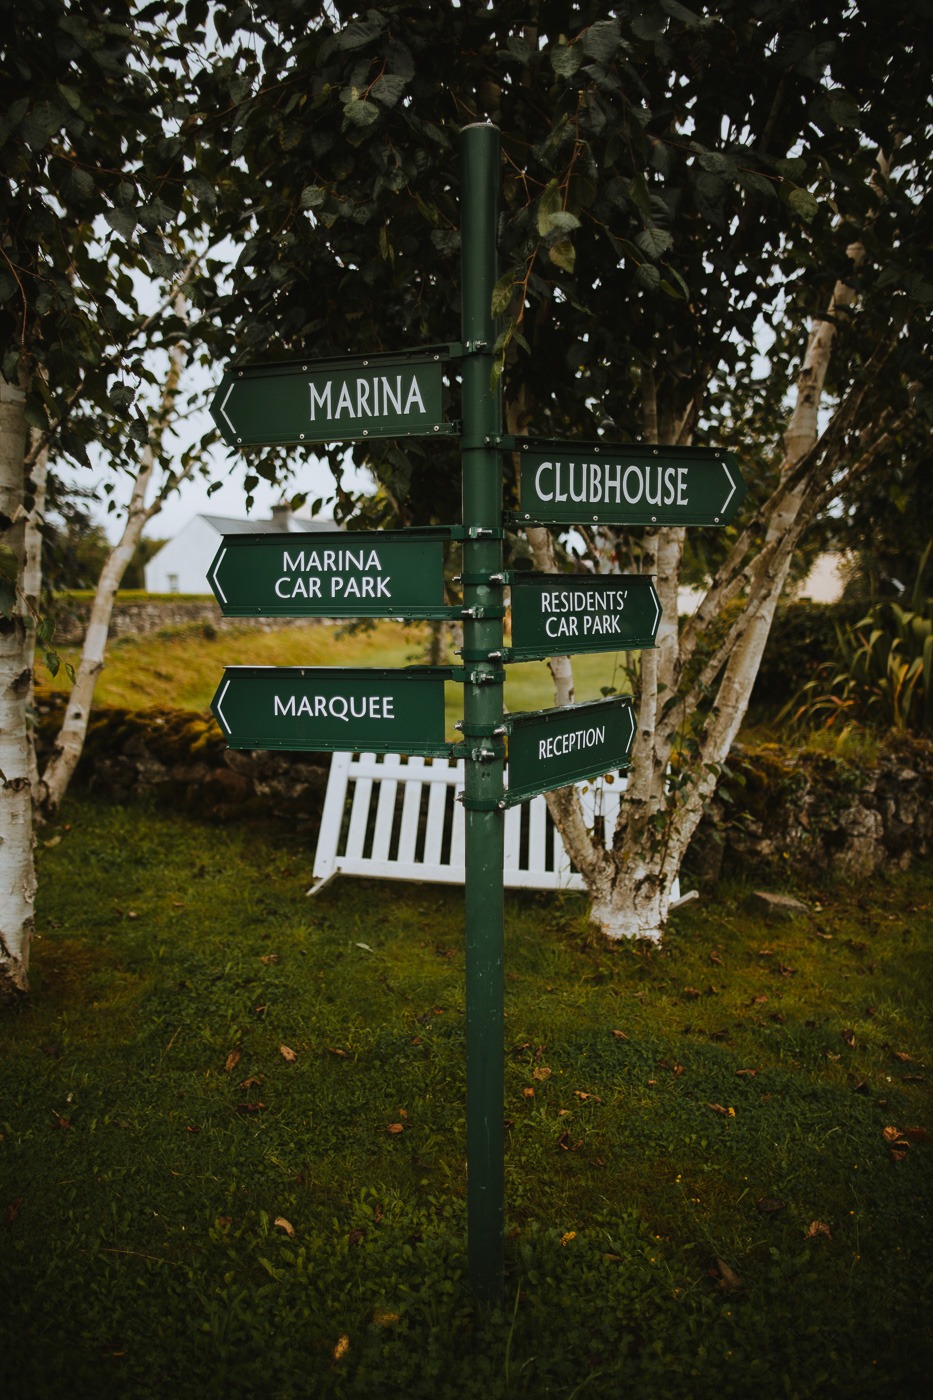 A close up of a street sign with trees in the background